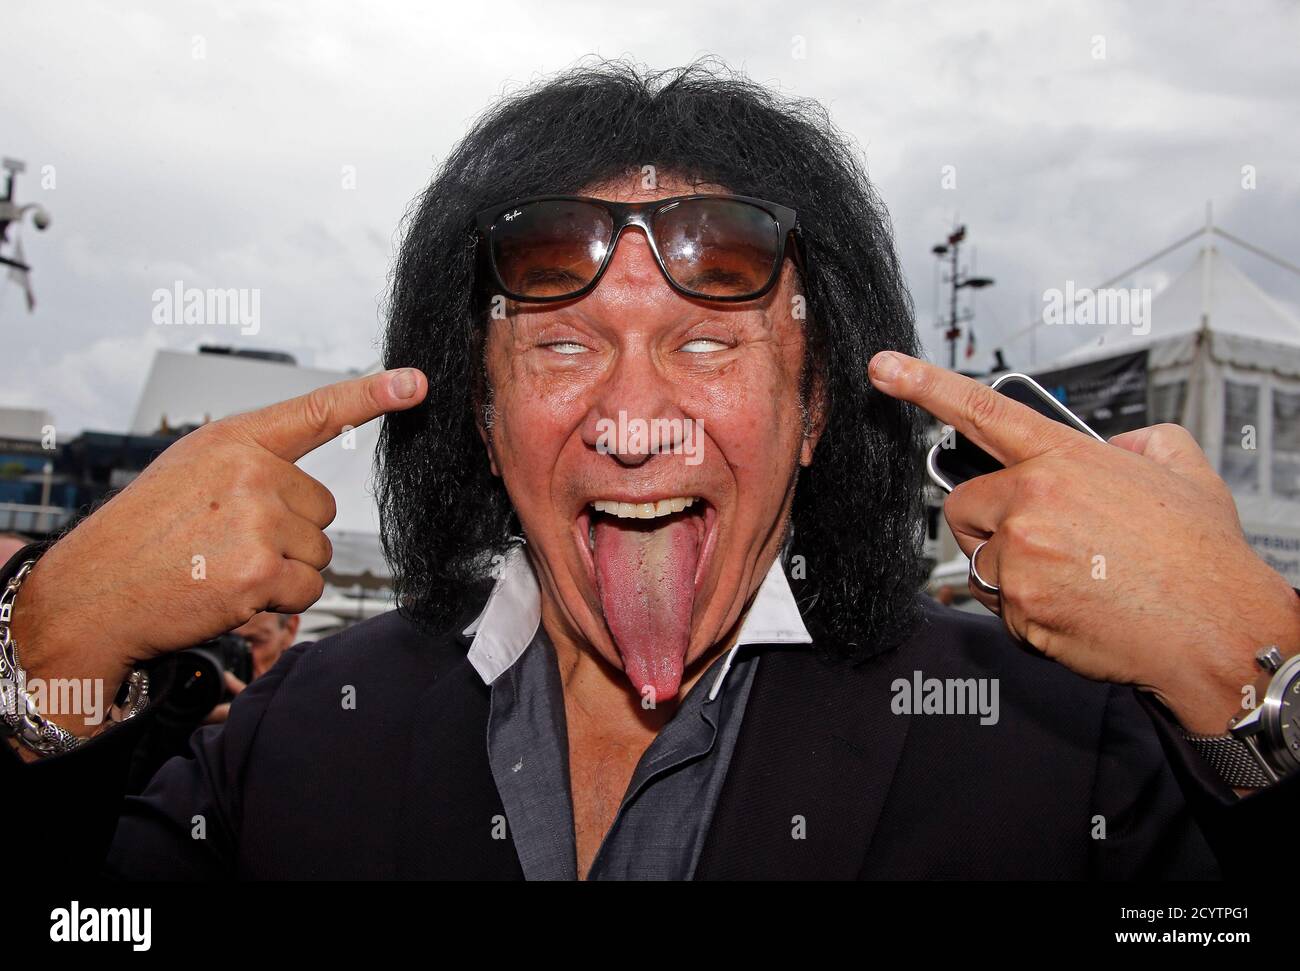 Musician Gene Simmons of the rock band Kiss sticks out his tongue as he  poses during a photocall for the television reality singing competition  show "Coliseum" during the annual MIPCOM television programme